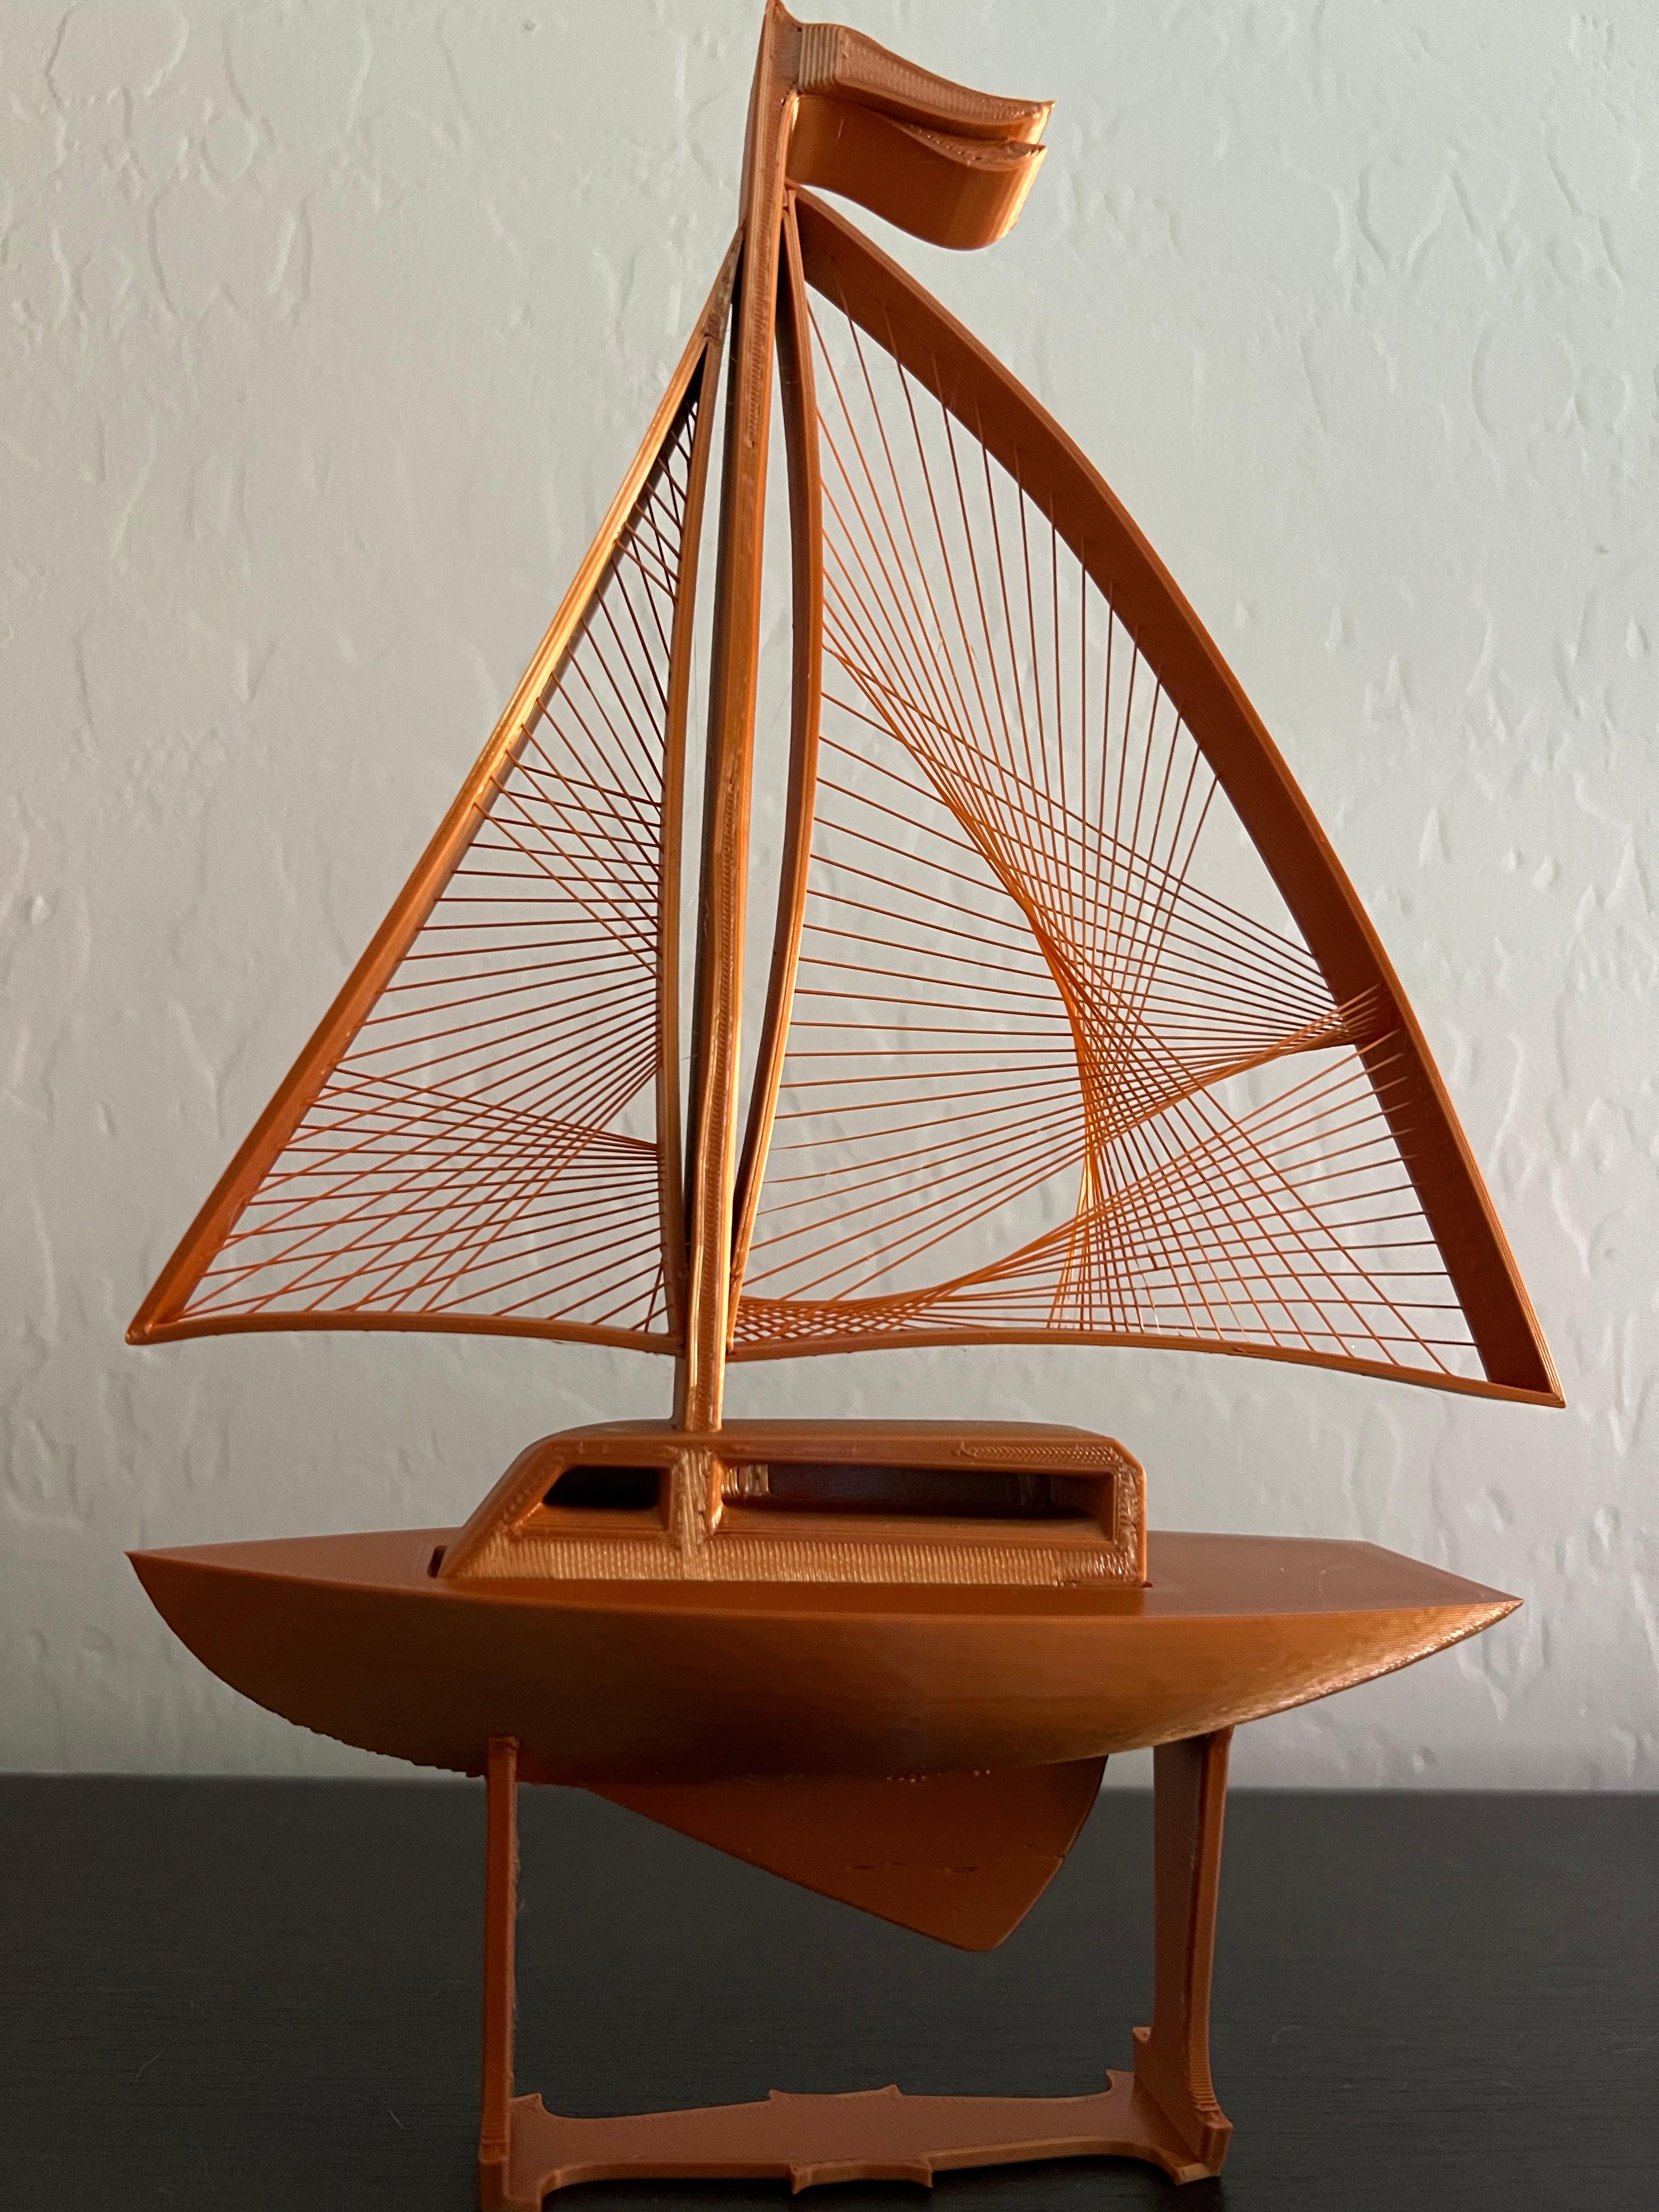 Sailboat Small - These are so fascinating. They are great. I hope they inspire my girls to think outside the box and make awesome things - 3d model